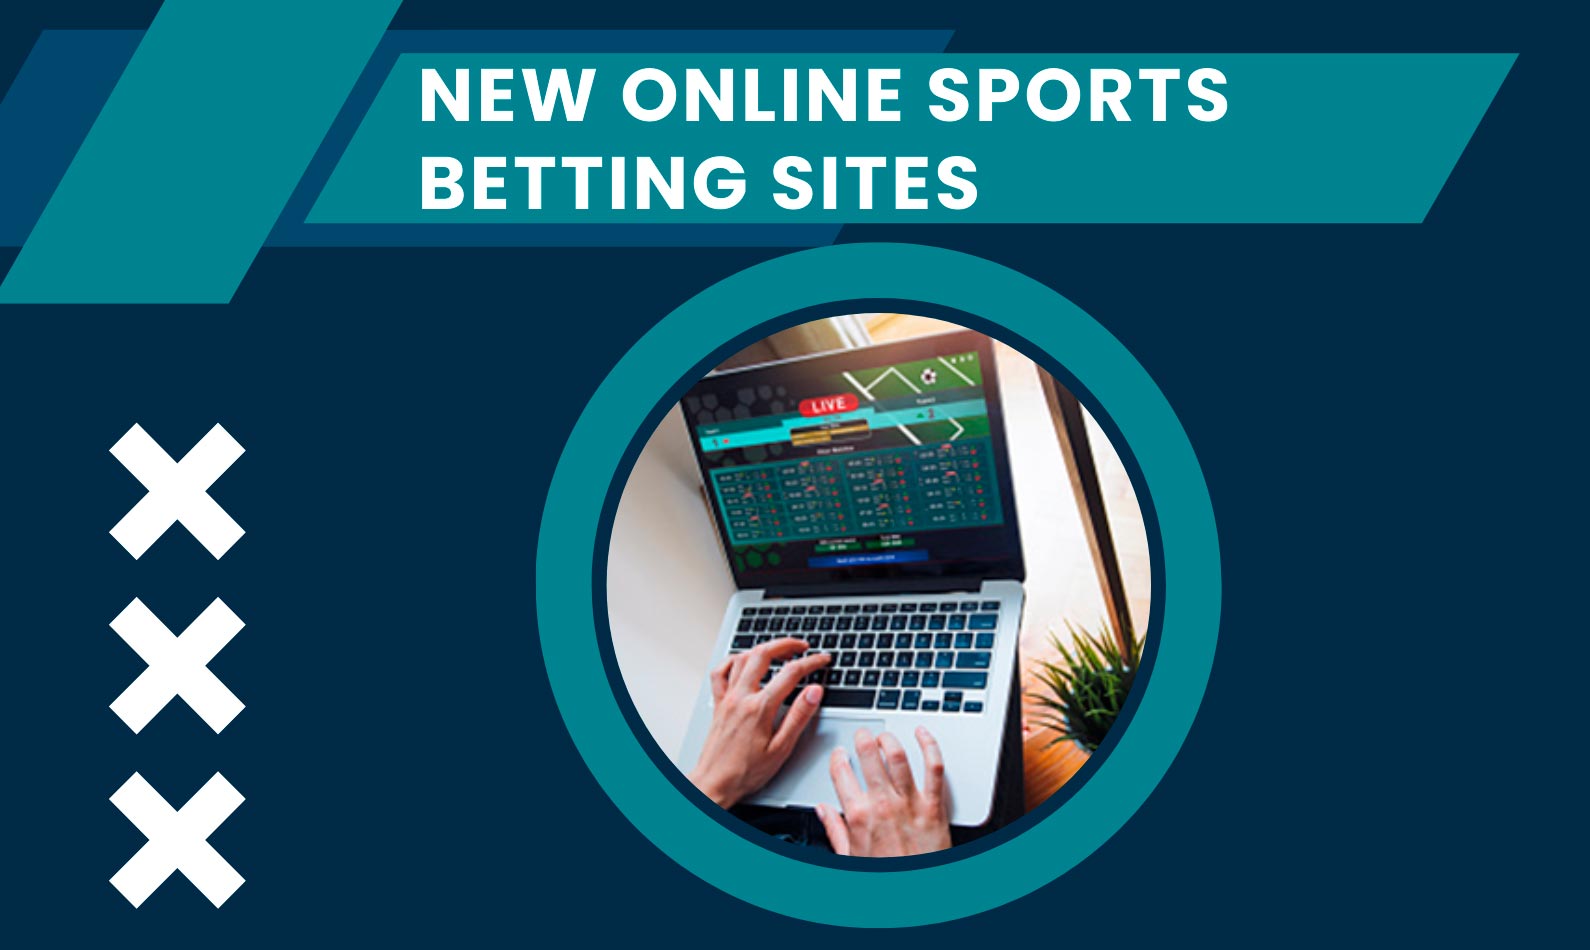 about new online sports betting sites